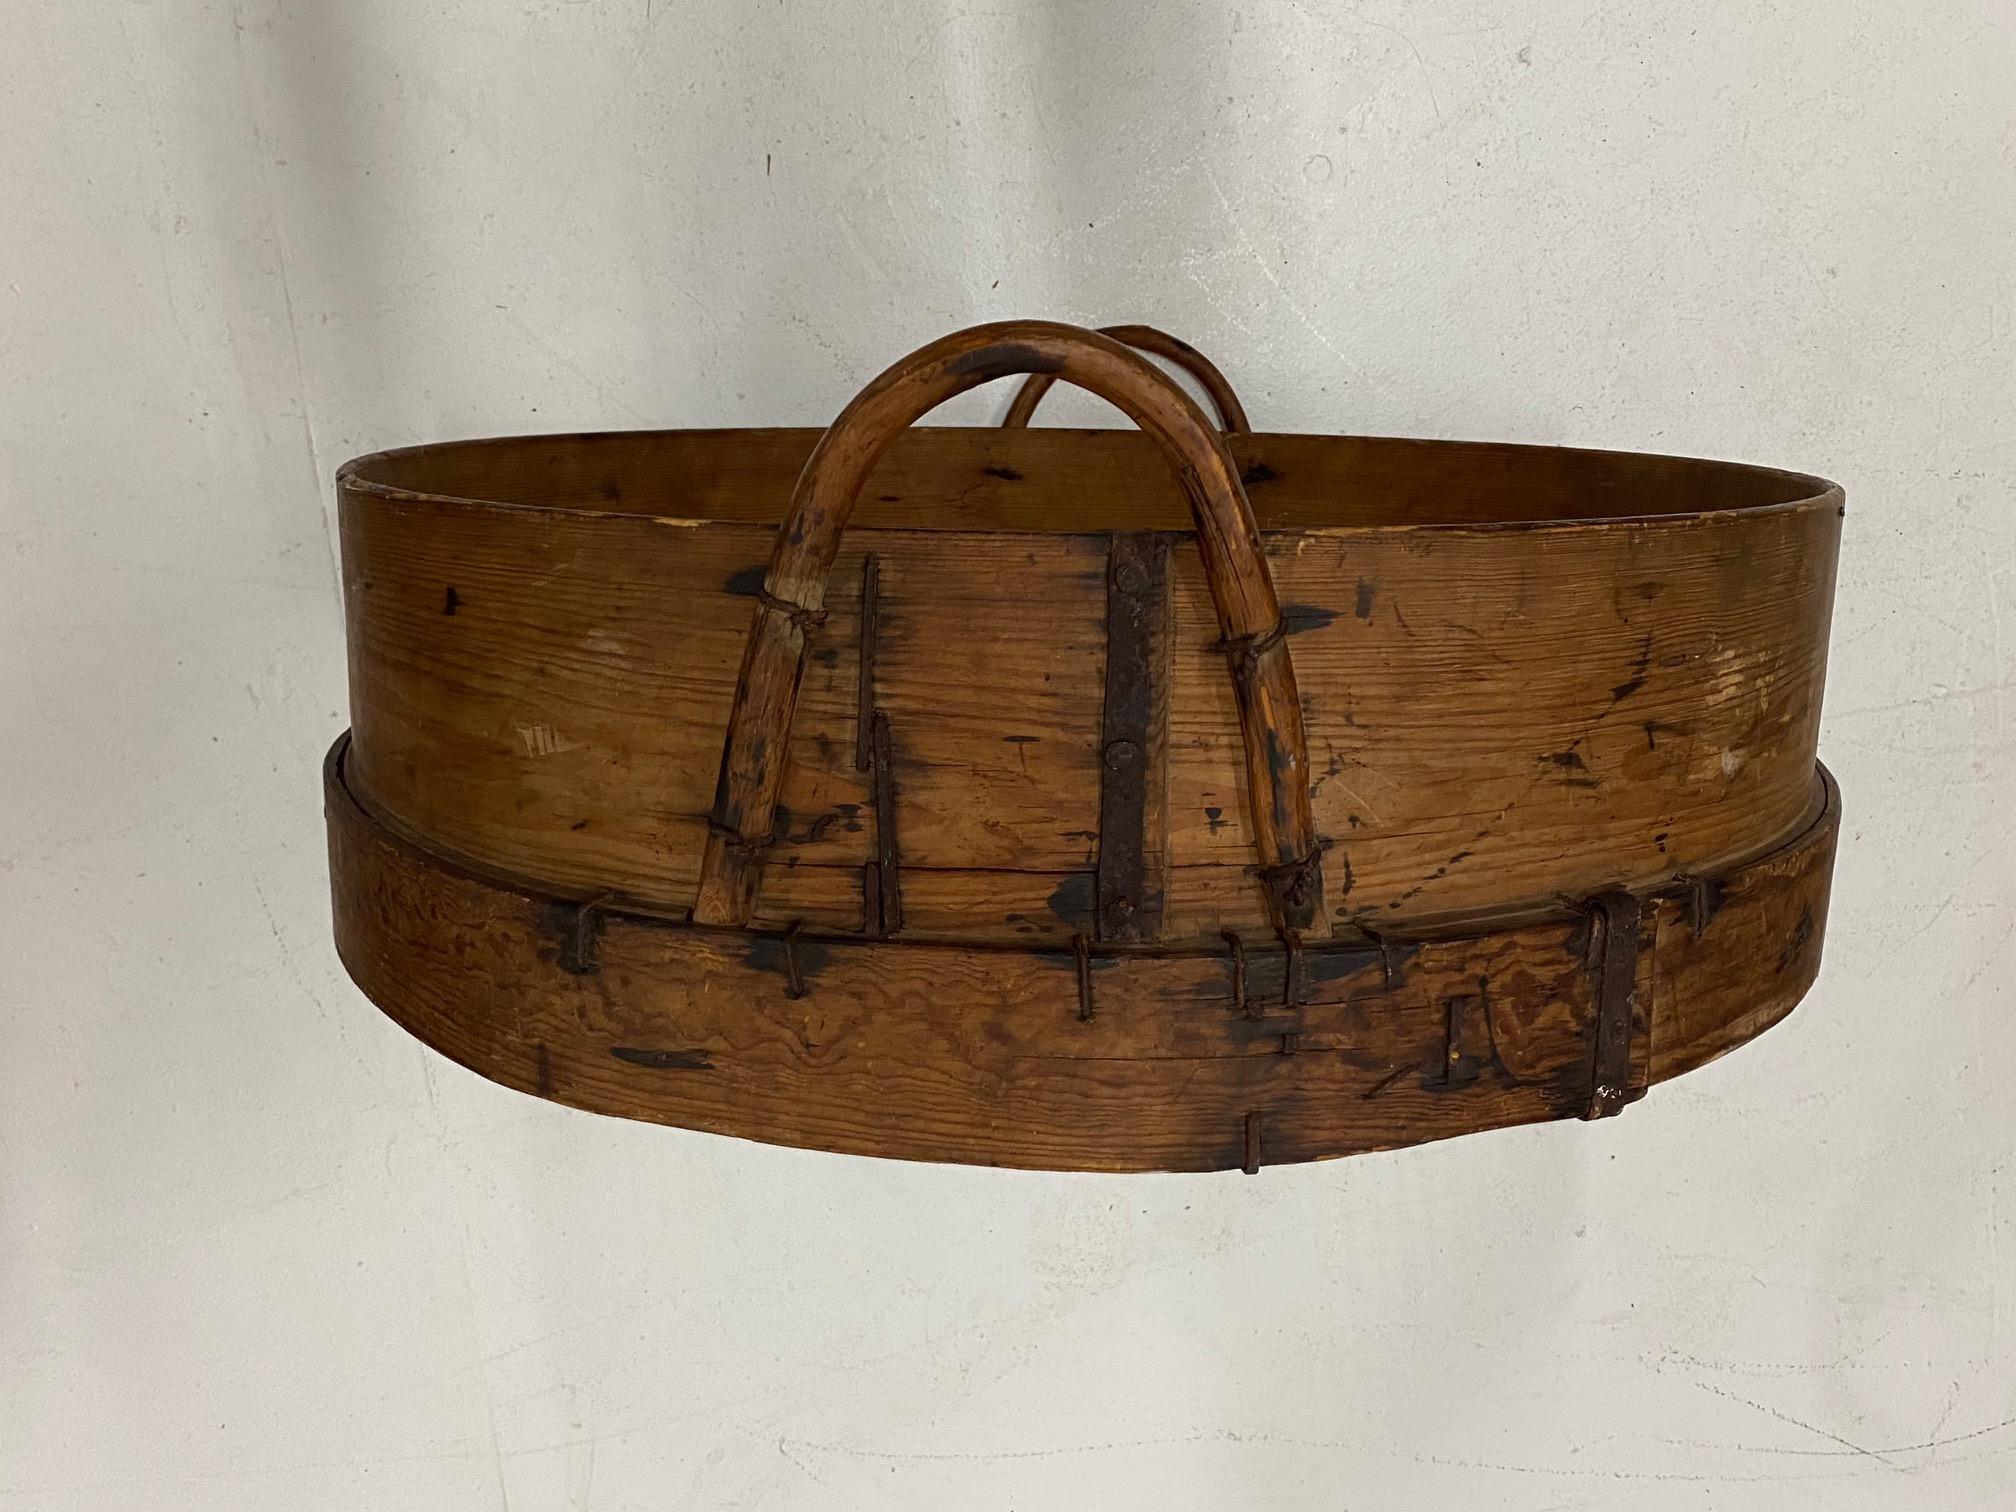 Rustic Monumental Antique Wooden Farm Sifter Wall Object